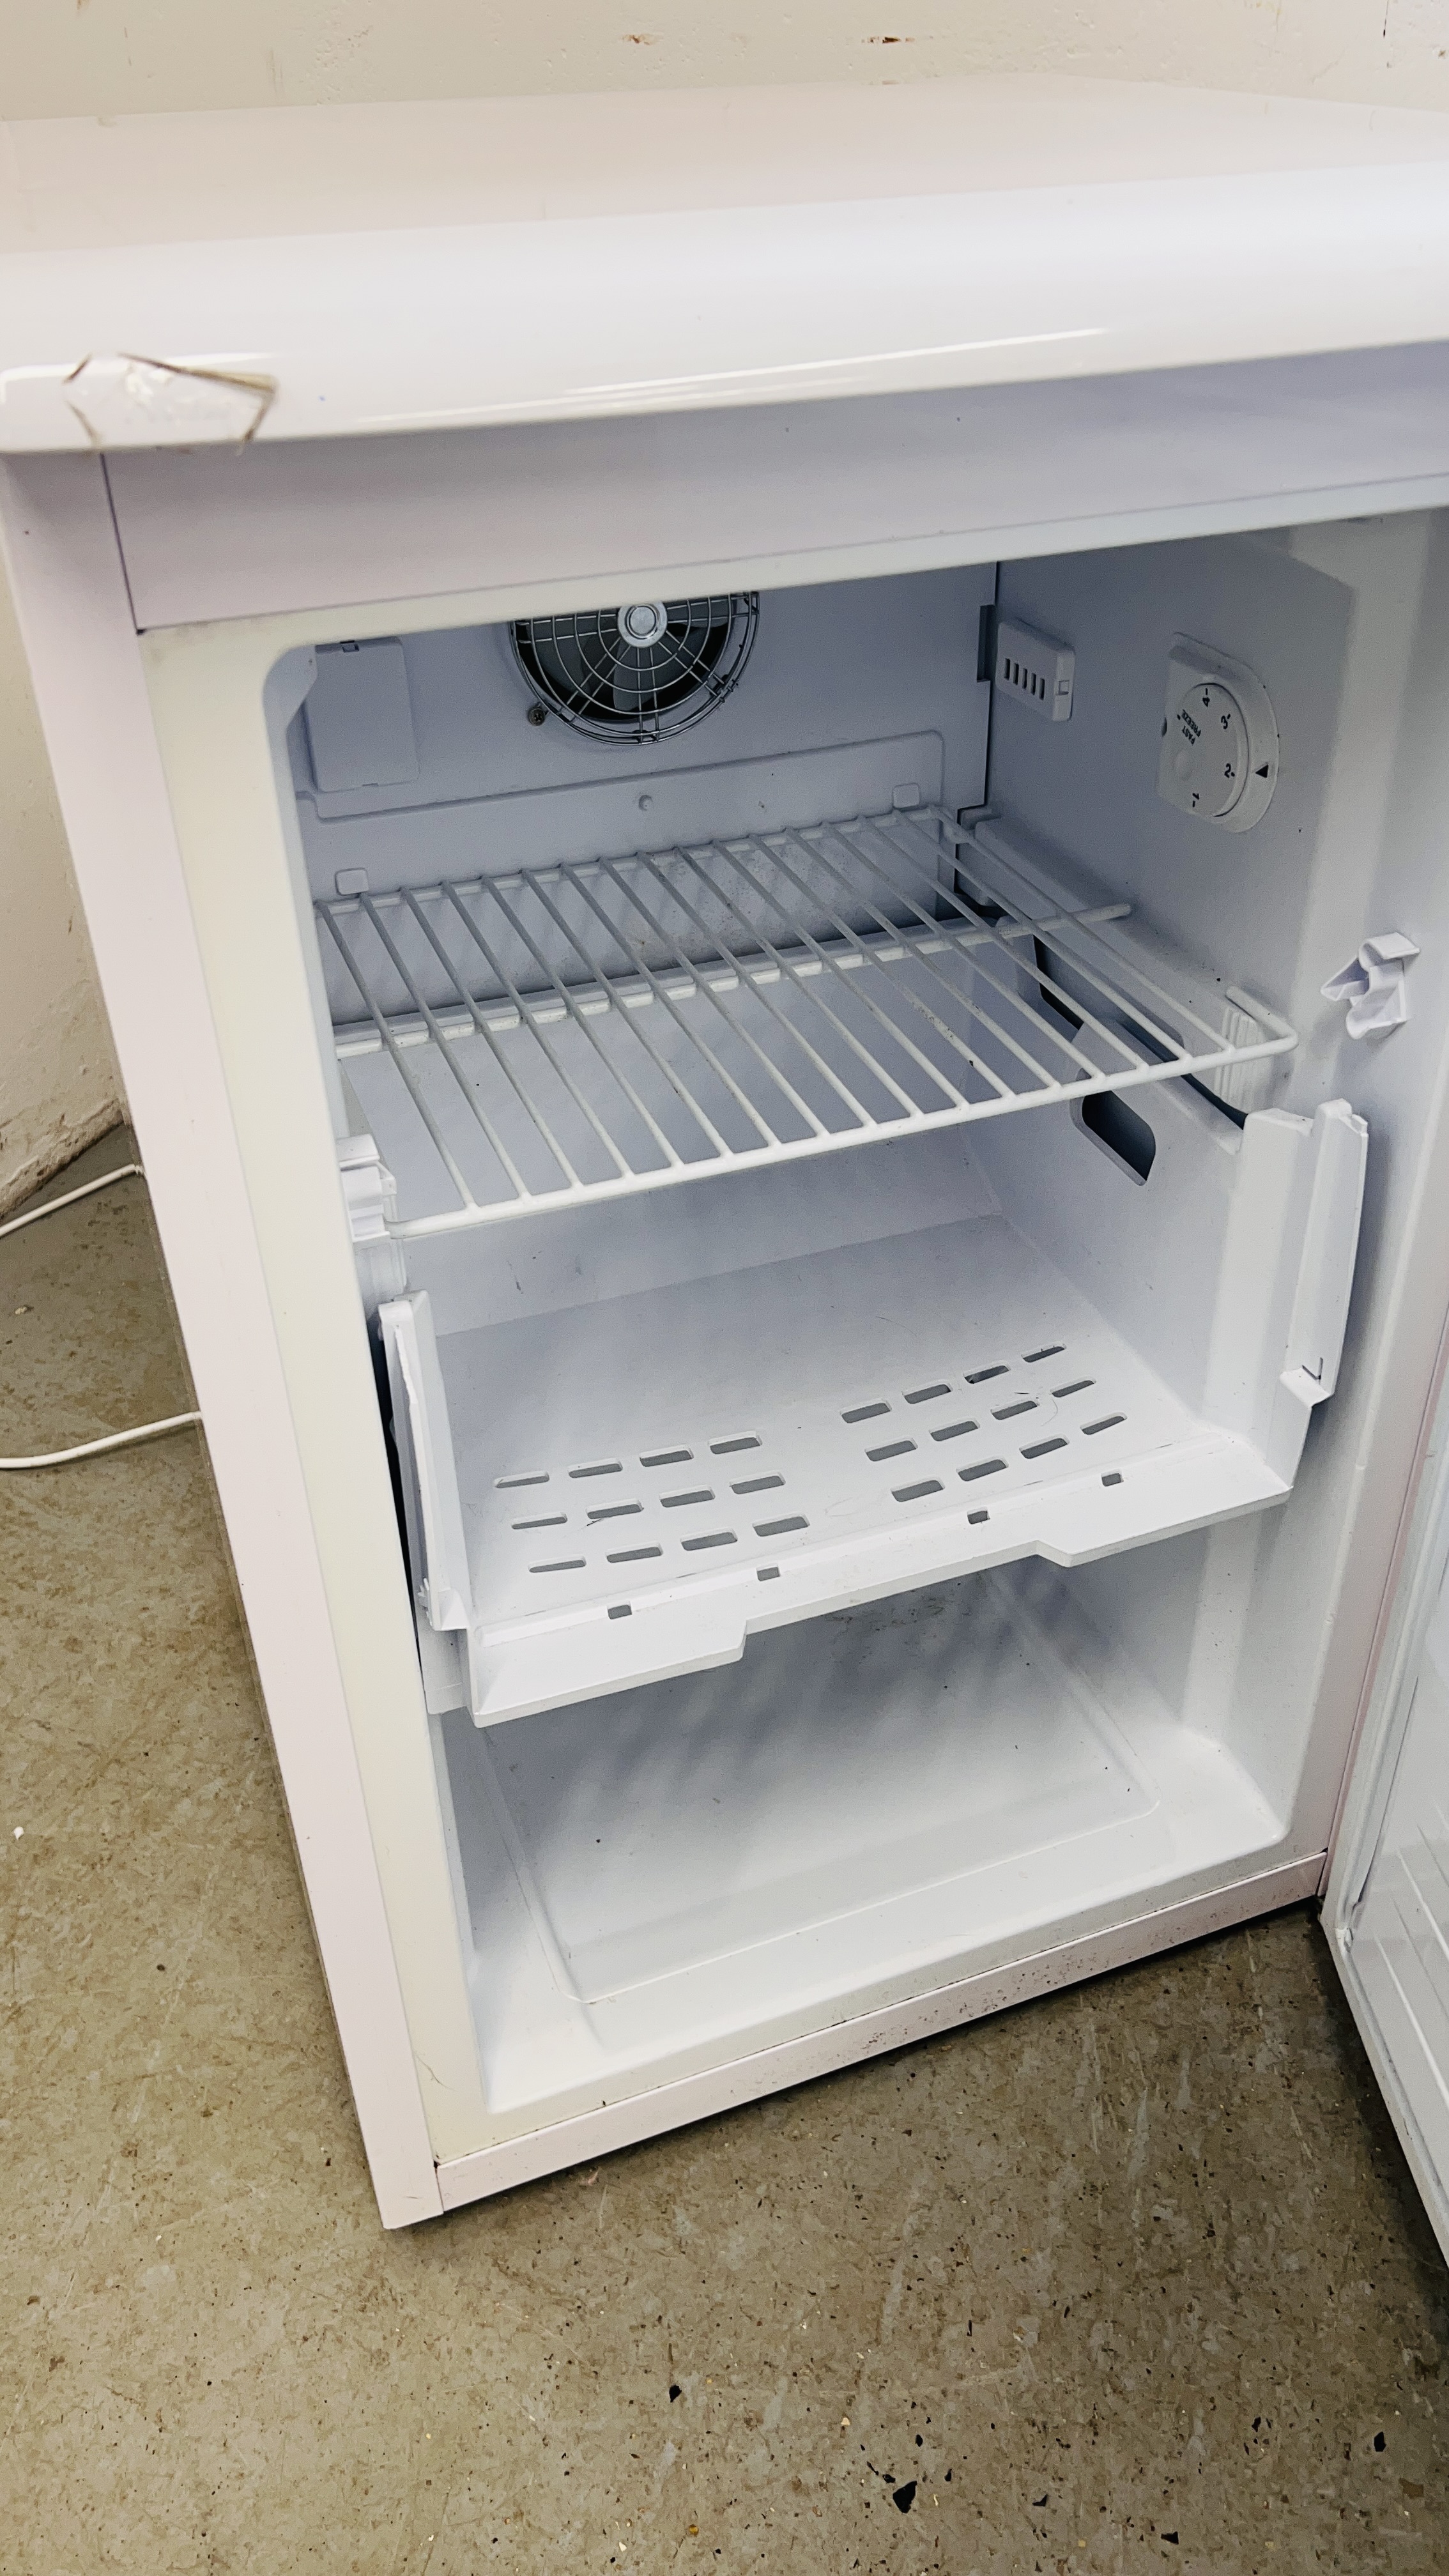 A BEKO UNDERCOUNTER FREEZER - SOLD AS SEEN. - Image 4 of 5